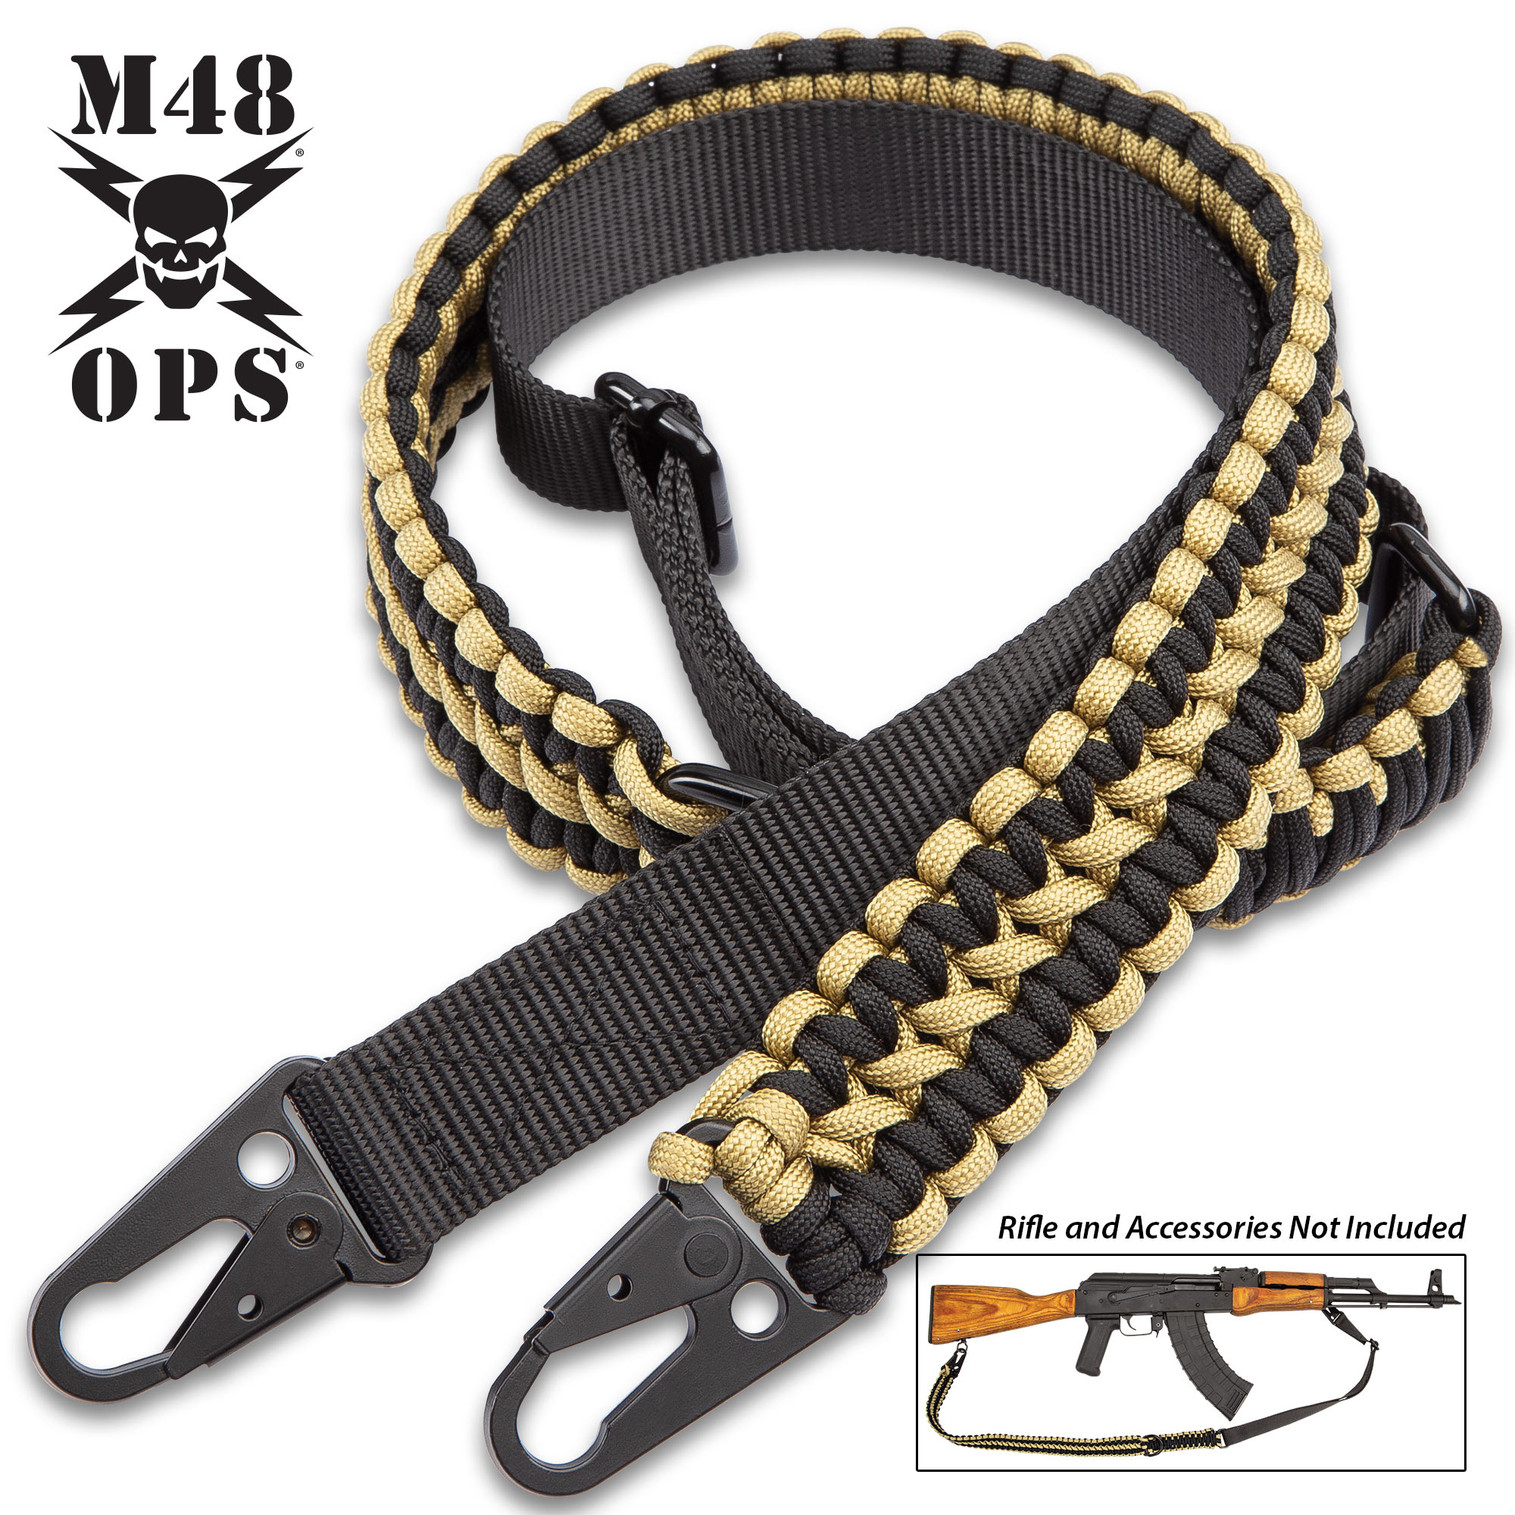 M48 Paracord Two-Point Gun Sling